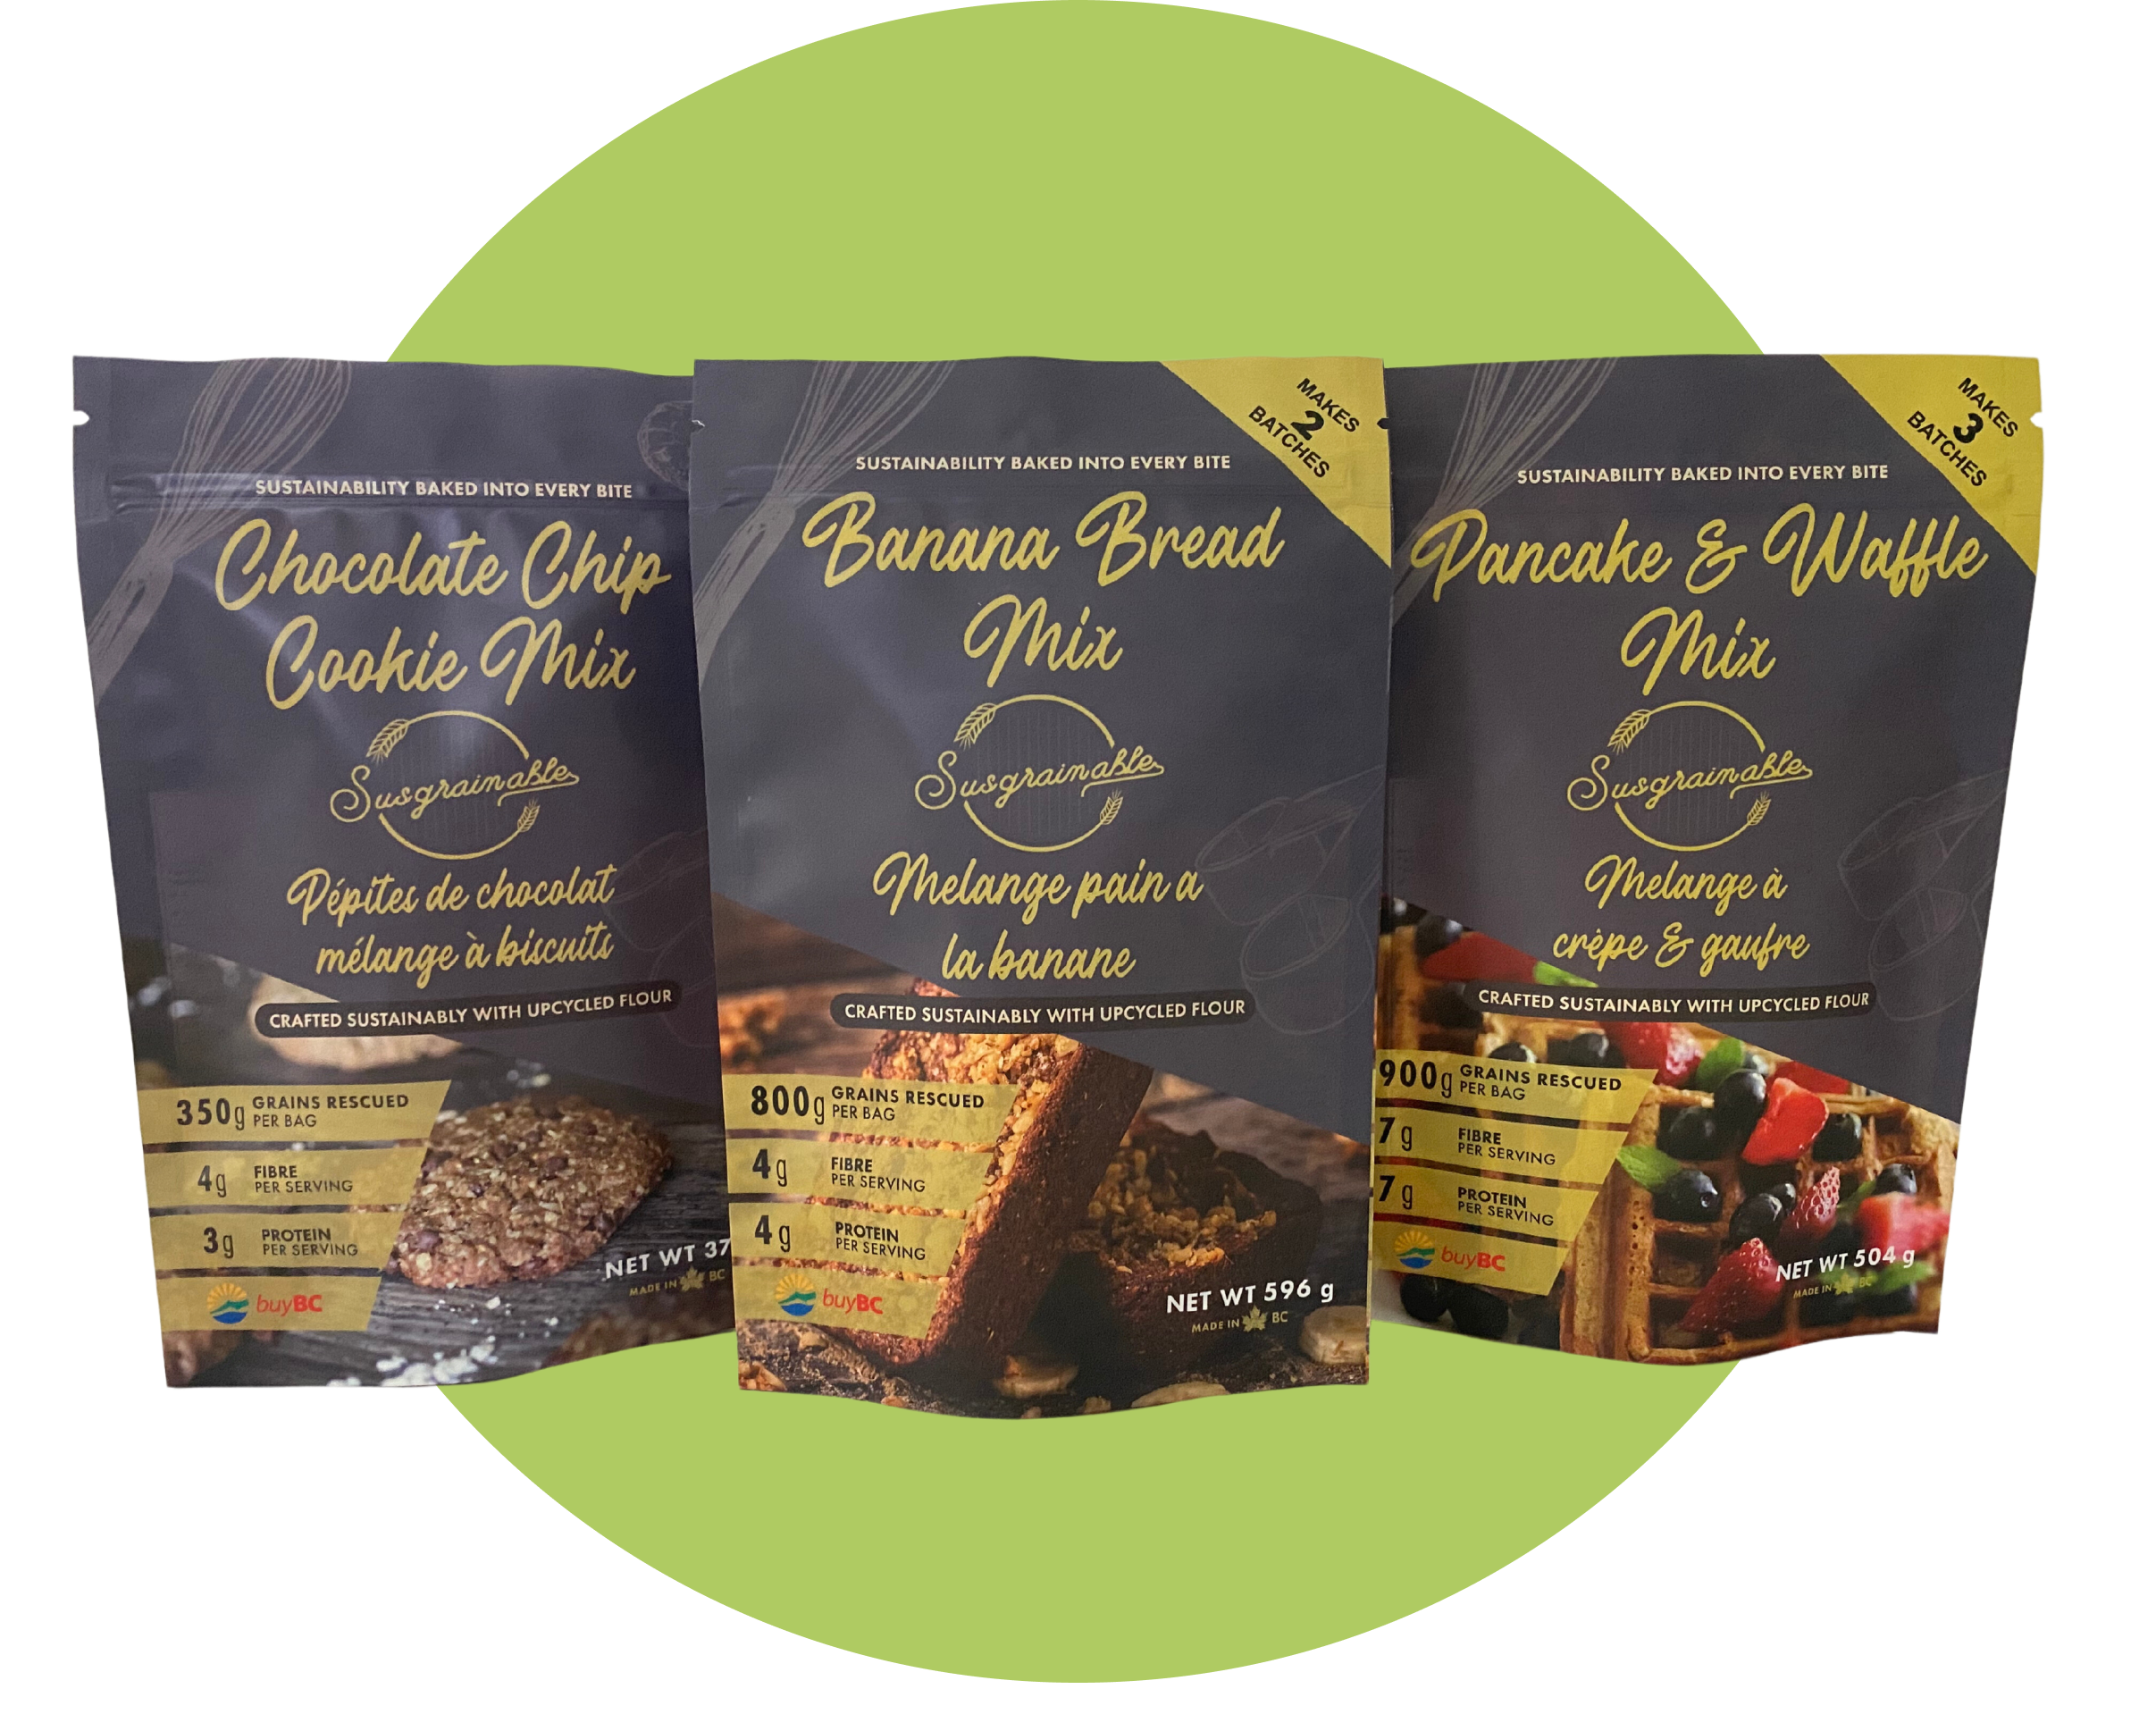 Susgrainable's chocolate chip cookie mix, banana bread mix, and pancake and waffle mix showcased over a green circle background.